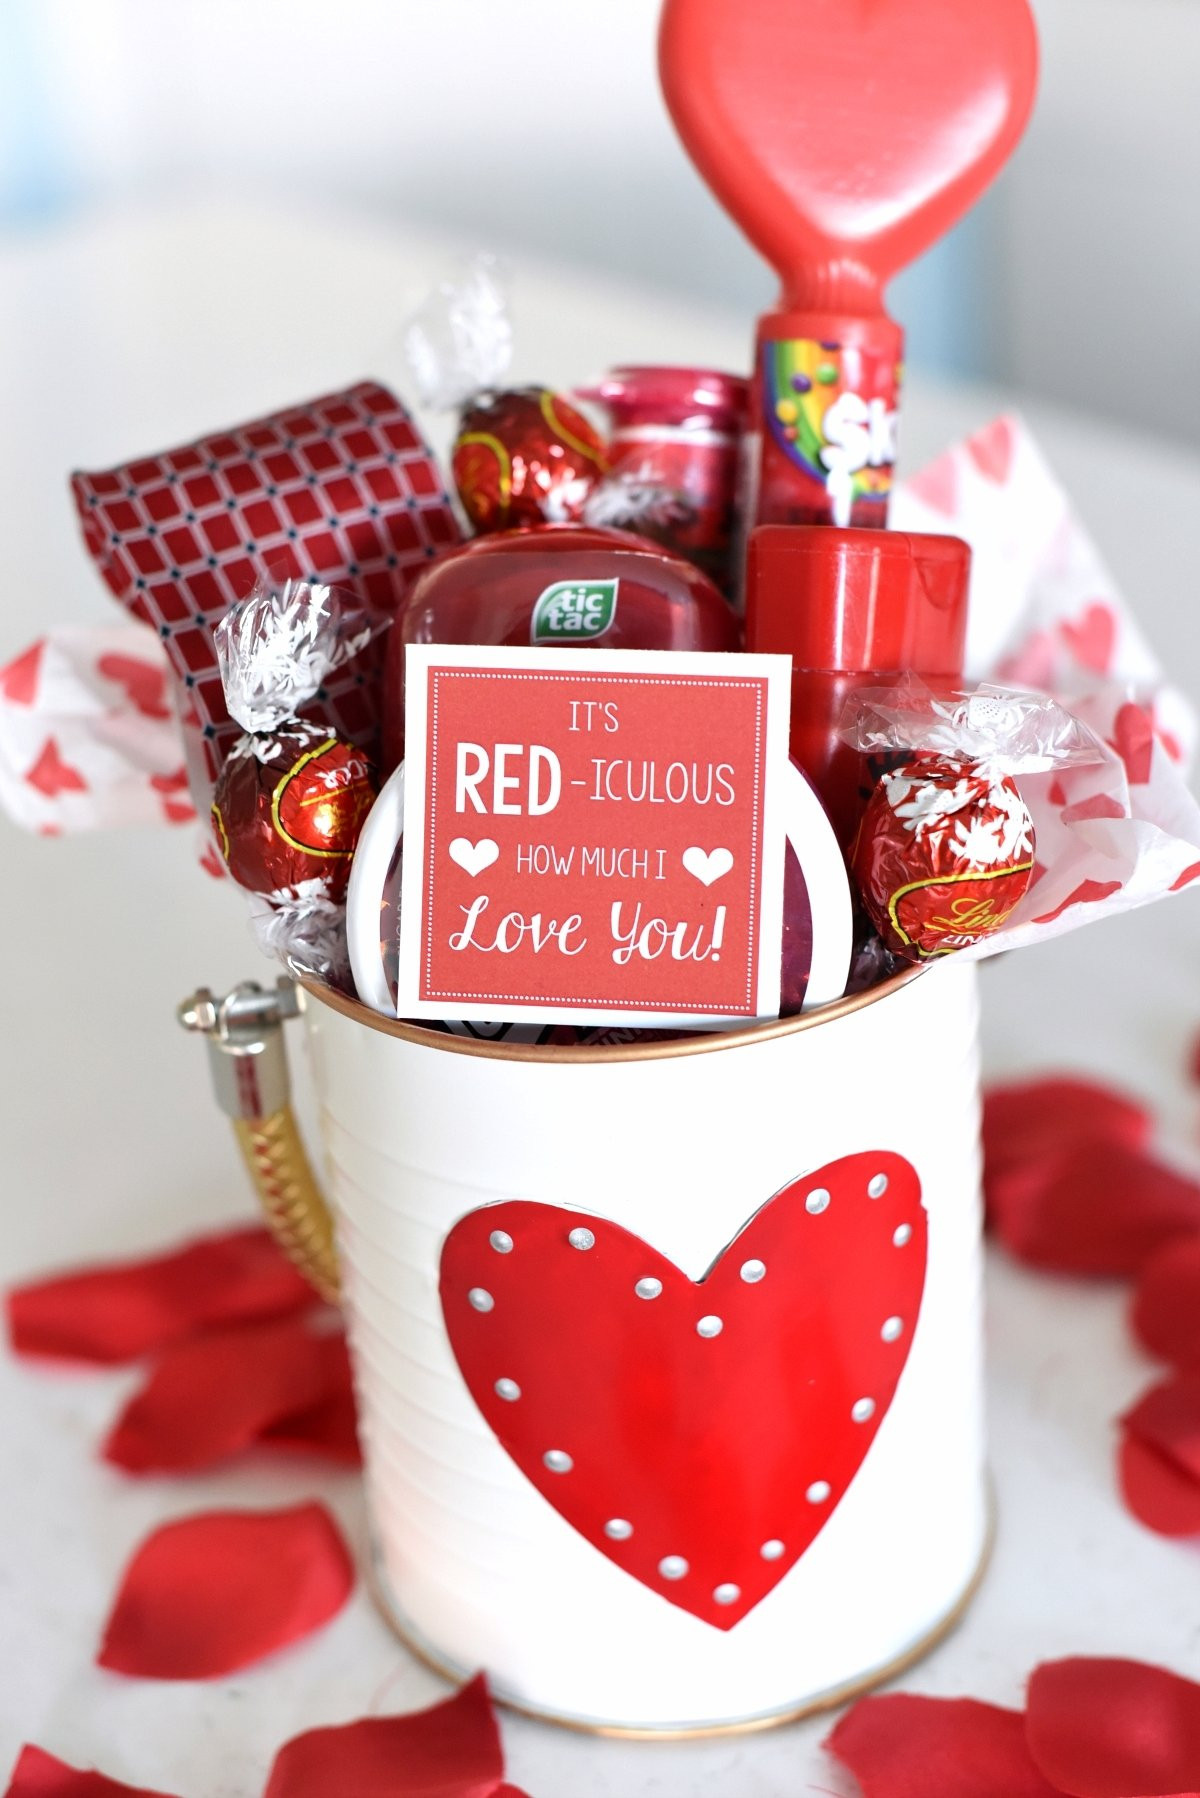 Valentines Day Gift Ideas 2020 Awesome 10 Elegant Valentines Day Gift Ideas for Wife 2020